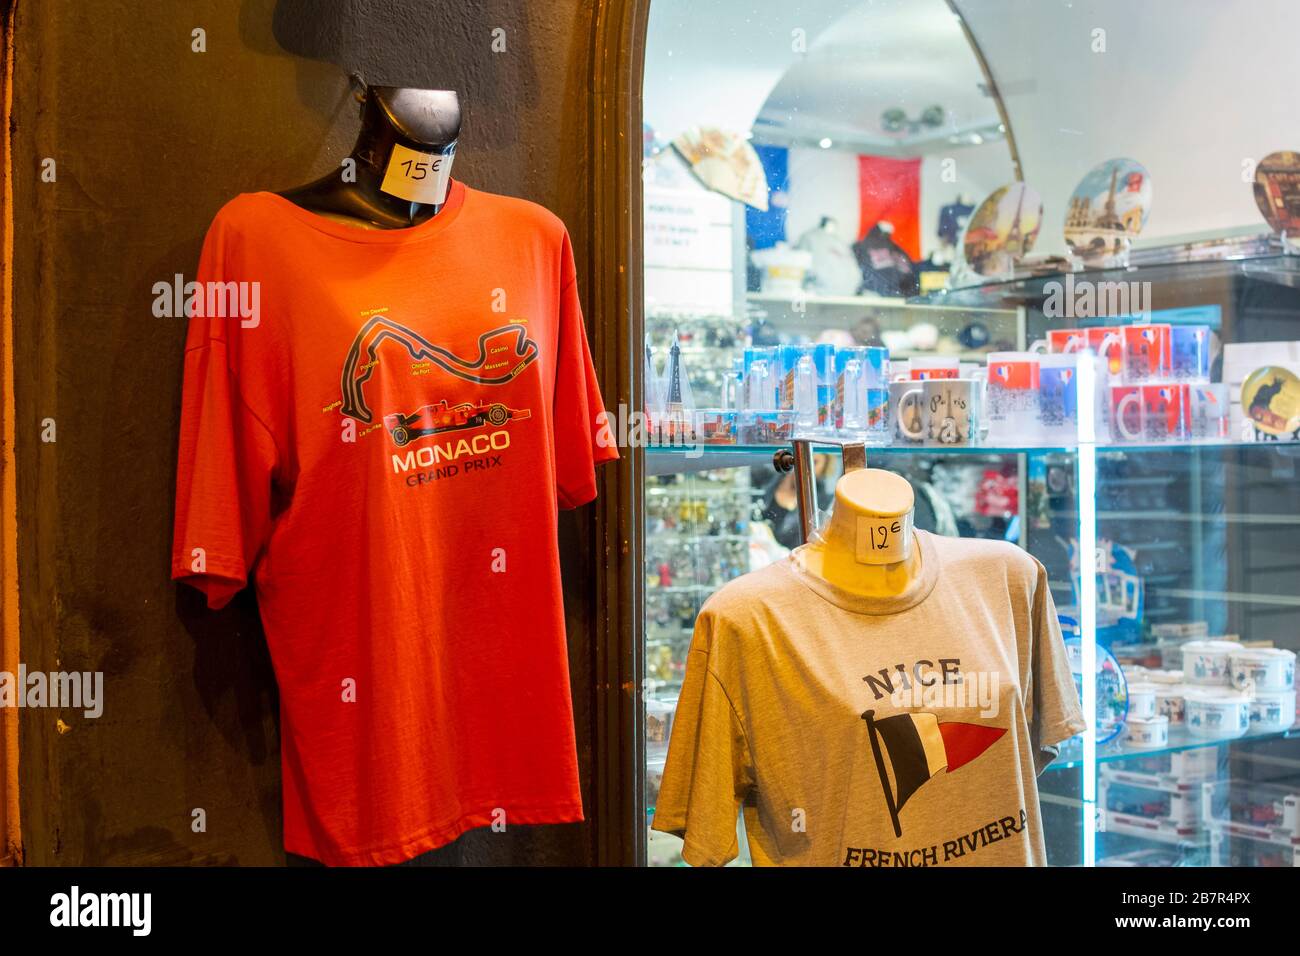 T-shirts on mannequins advertise the French Riviera and the Formula One Monaco Grand Prix outside a souvenir shop in Nice, France. Stock Photo